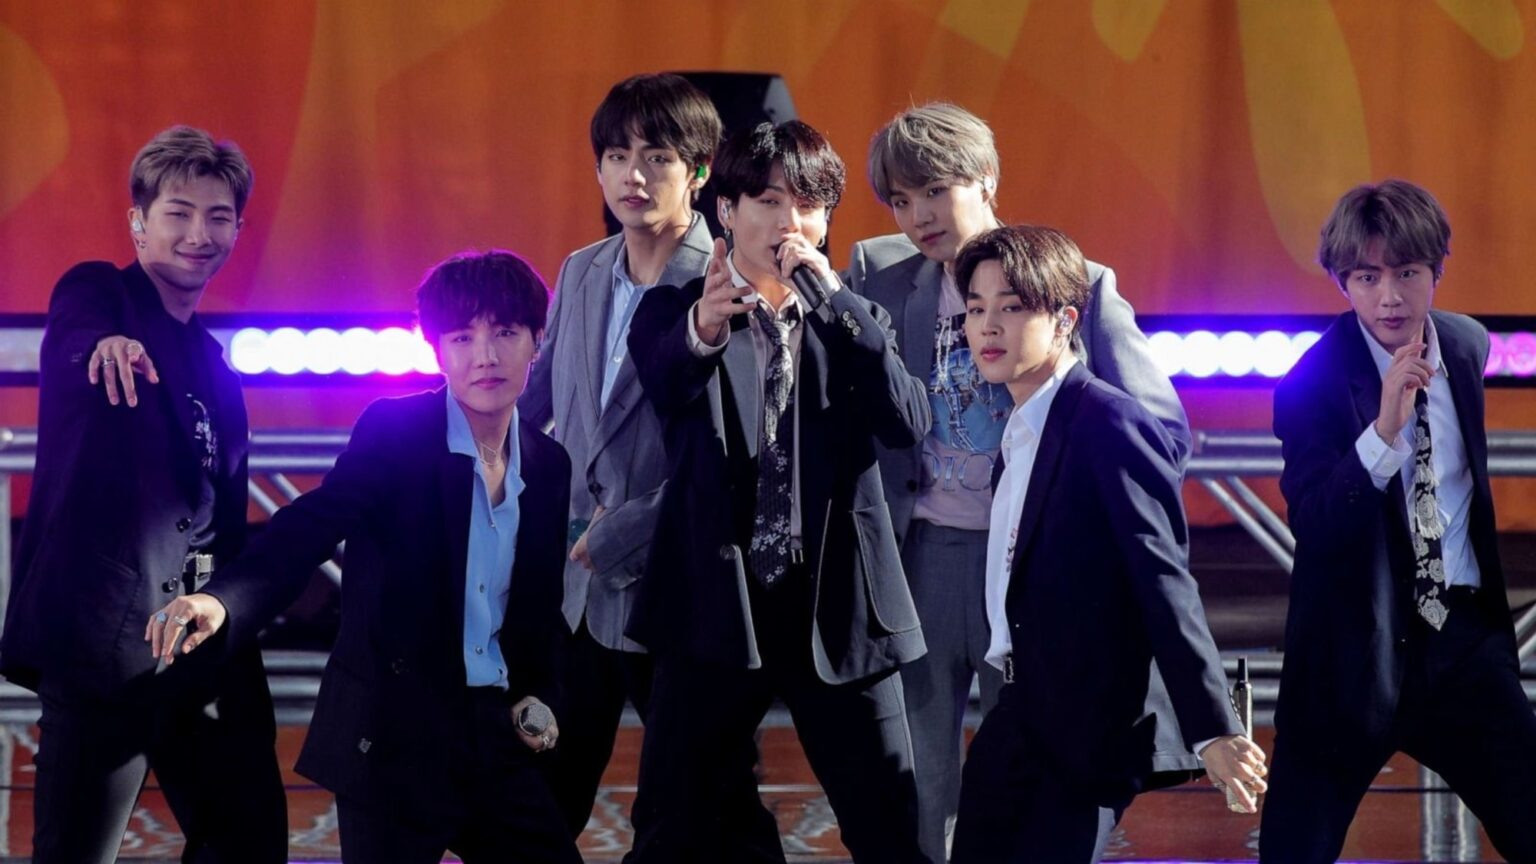 BTS exploded all over the news scene in 2020 with triumphs and tenderness. Check out the year's highlights for the Korean boy band.